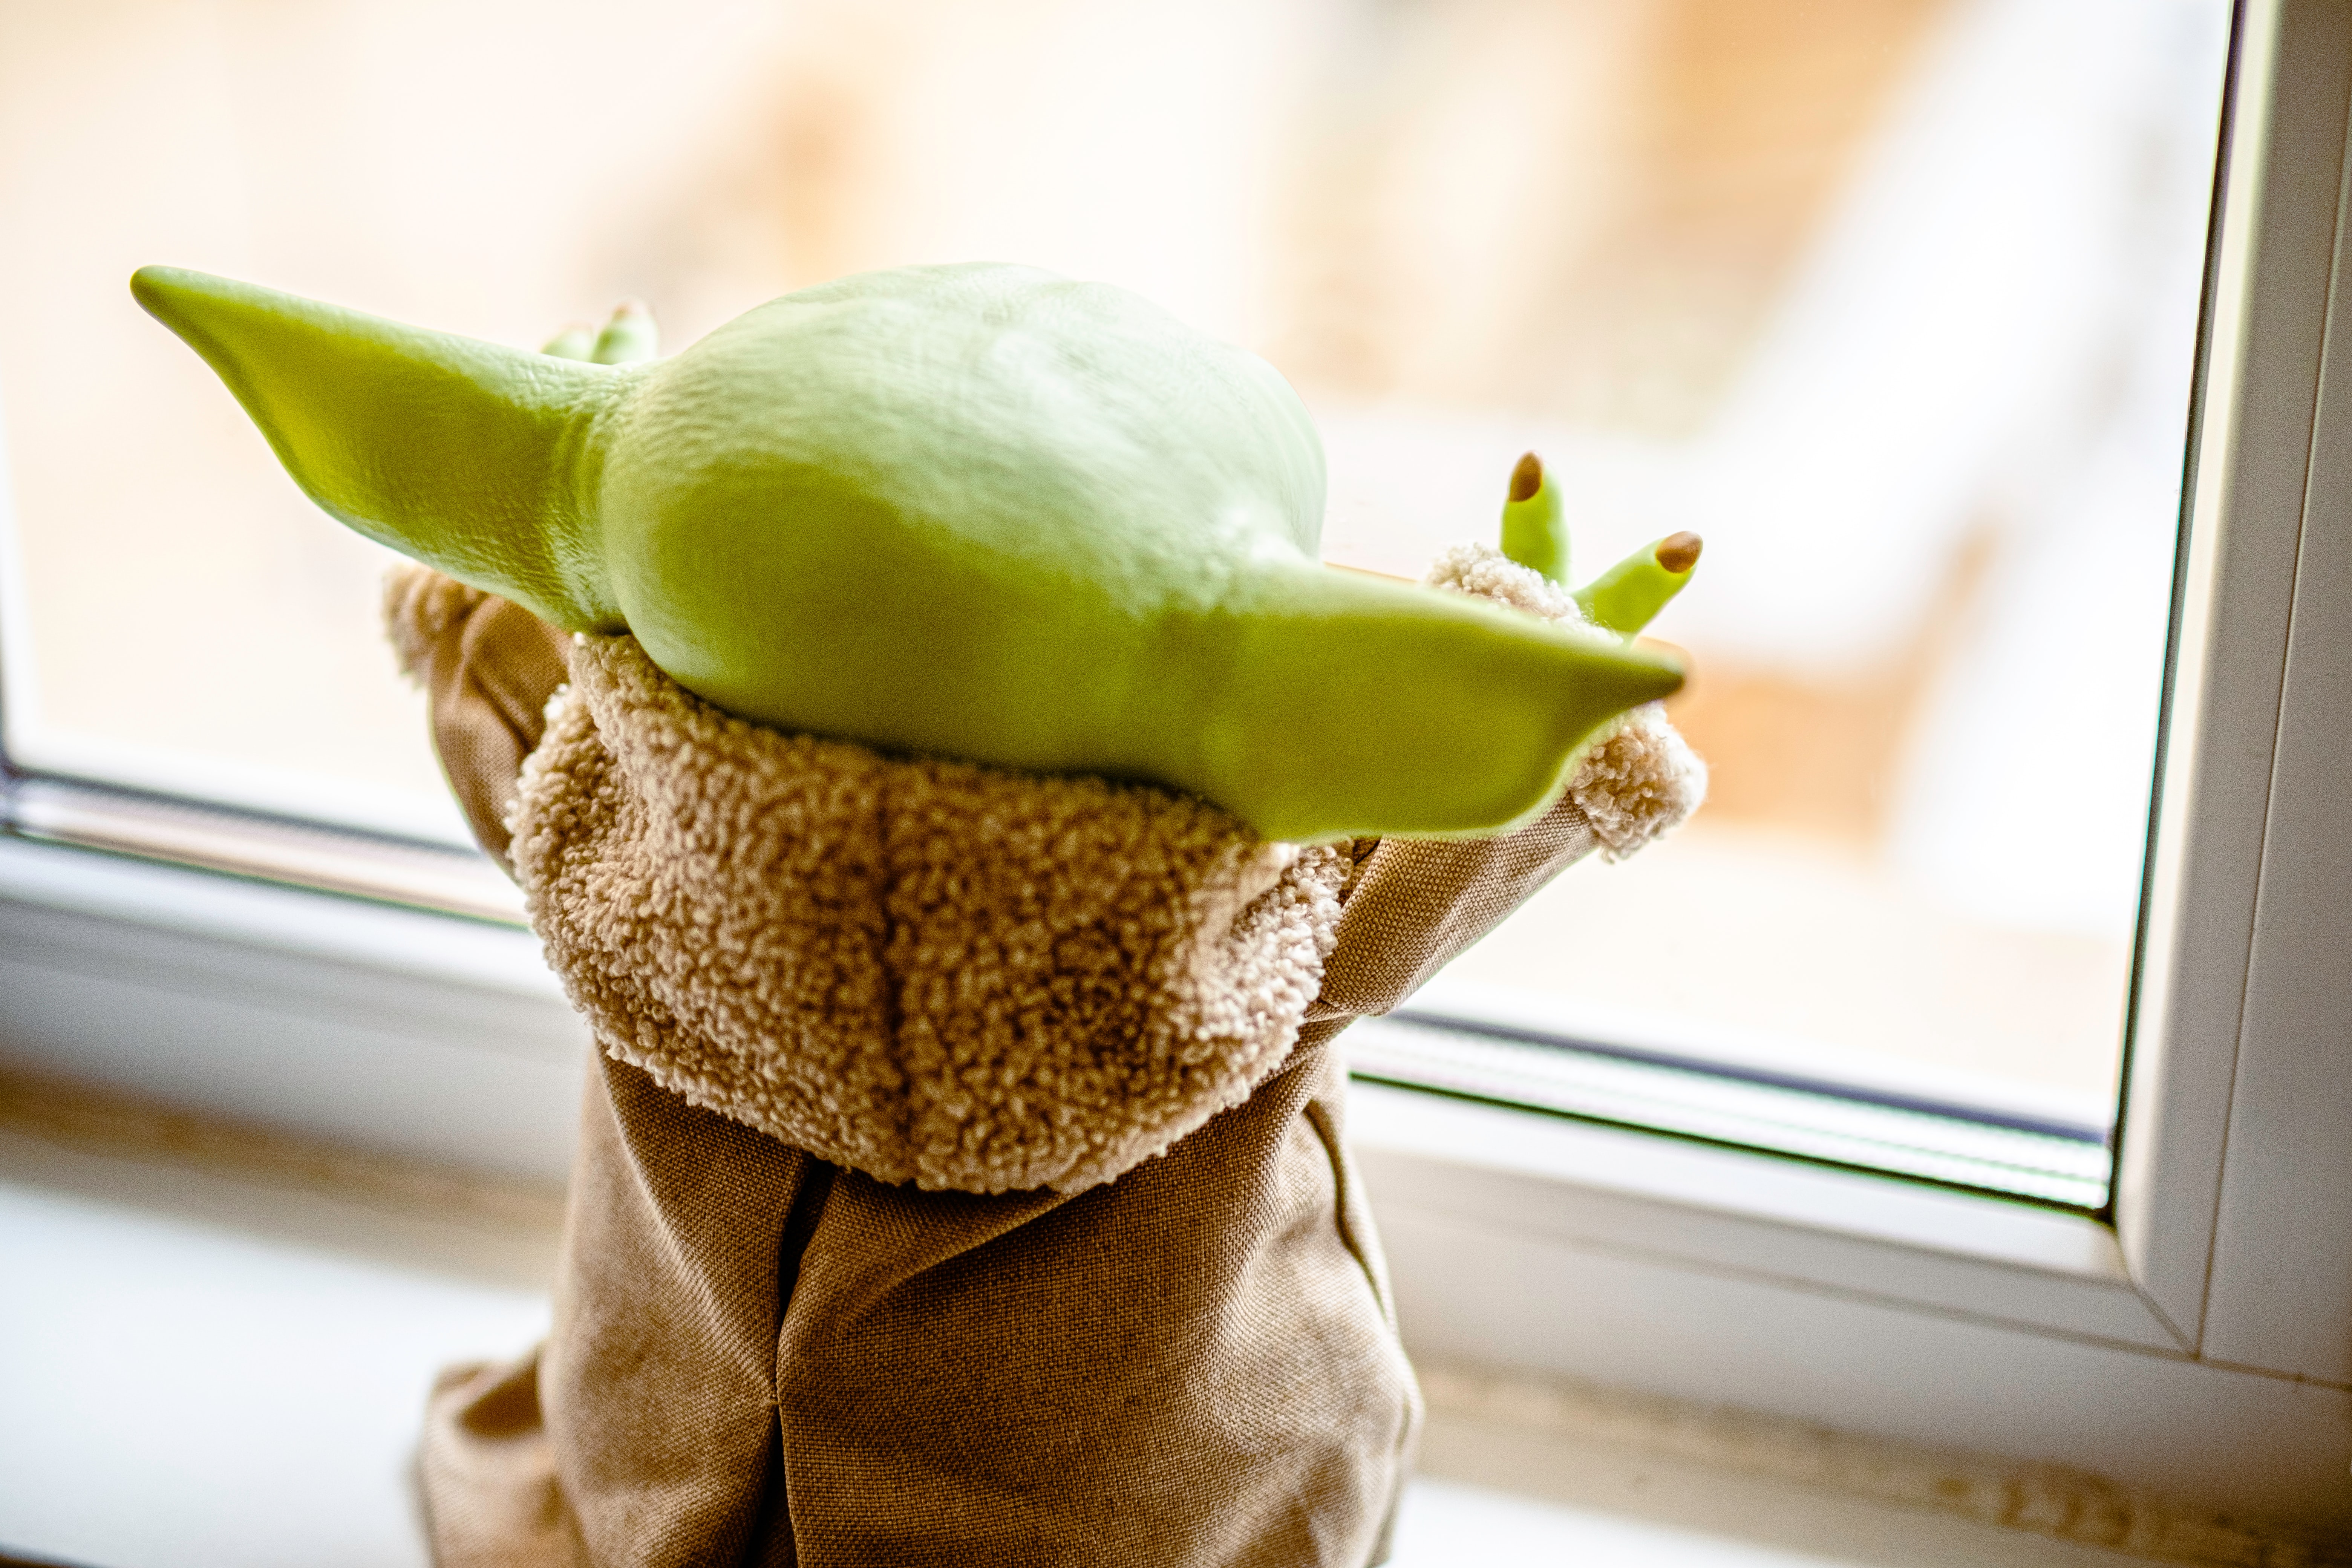 Baby Yoda staring out bright window